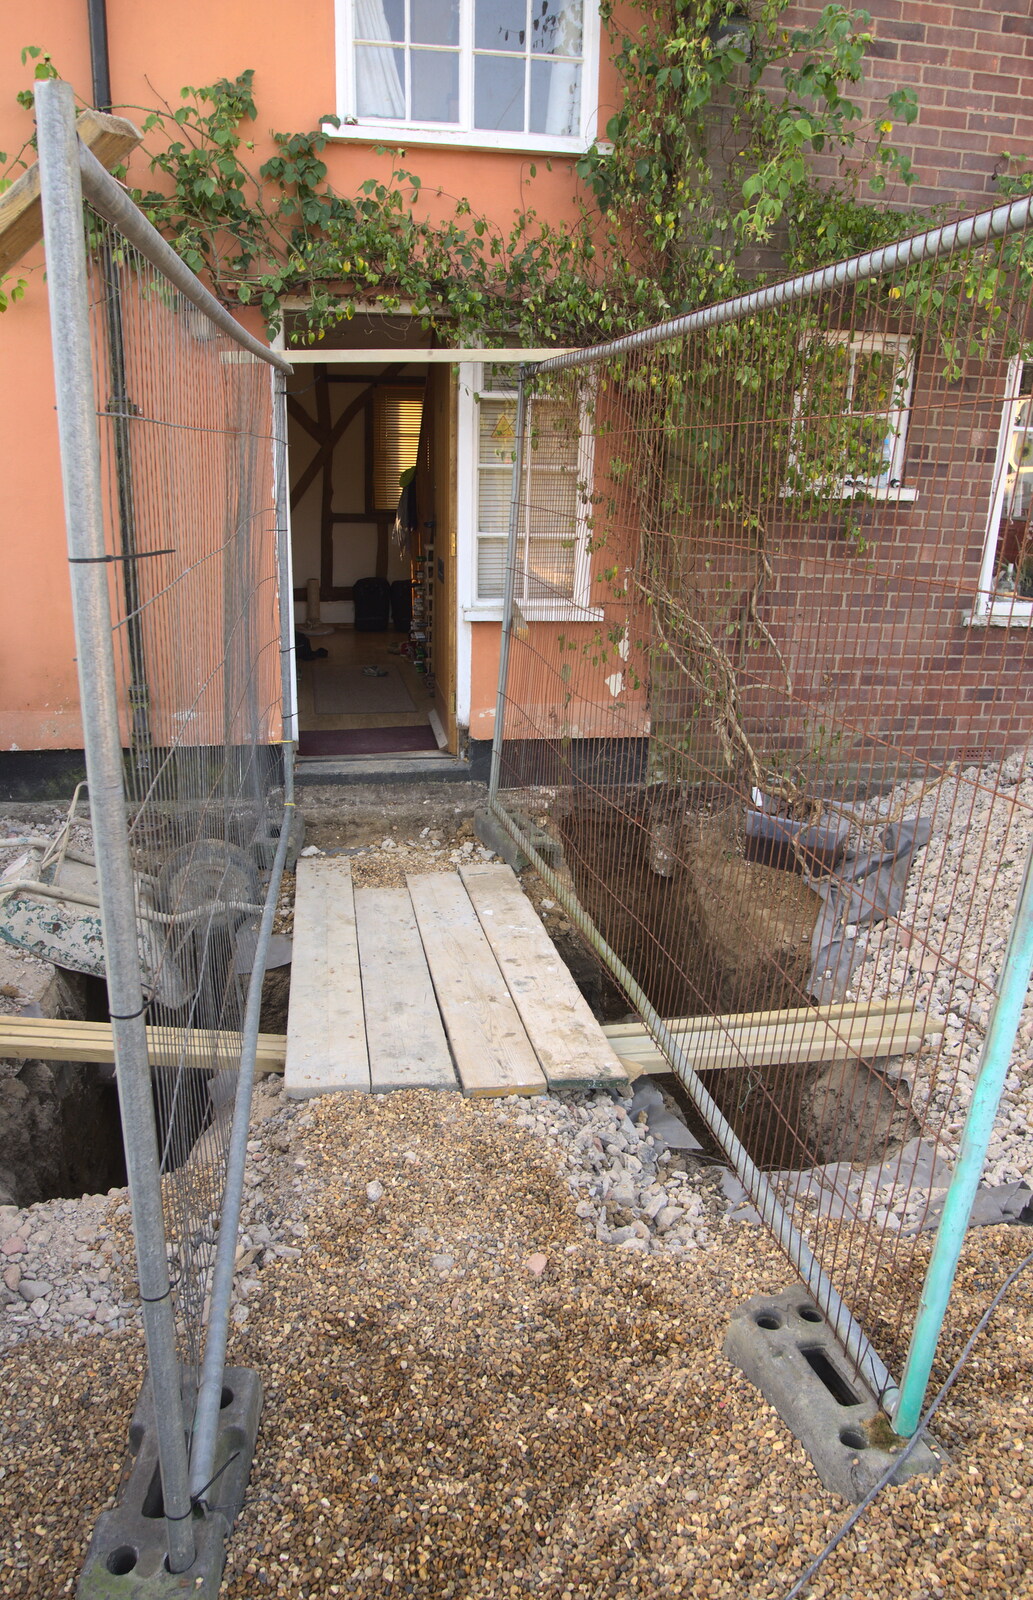 The front door has got its own moat from A Giant Sand Pile, and a Walk at Thornham, Suffolk - 17th August 2013